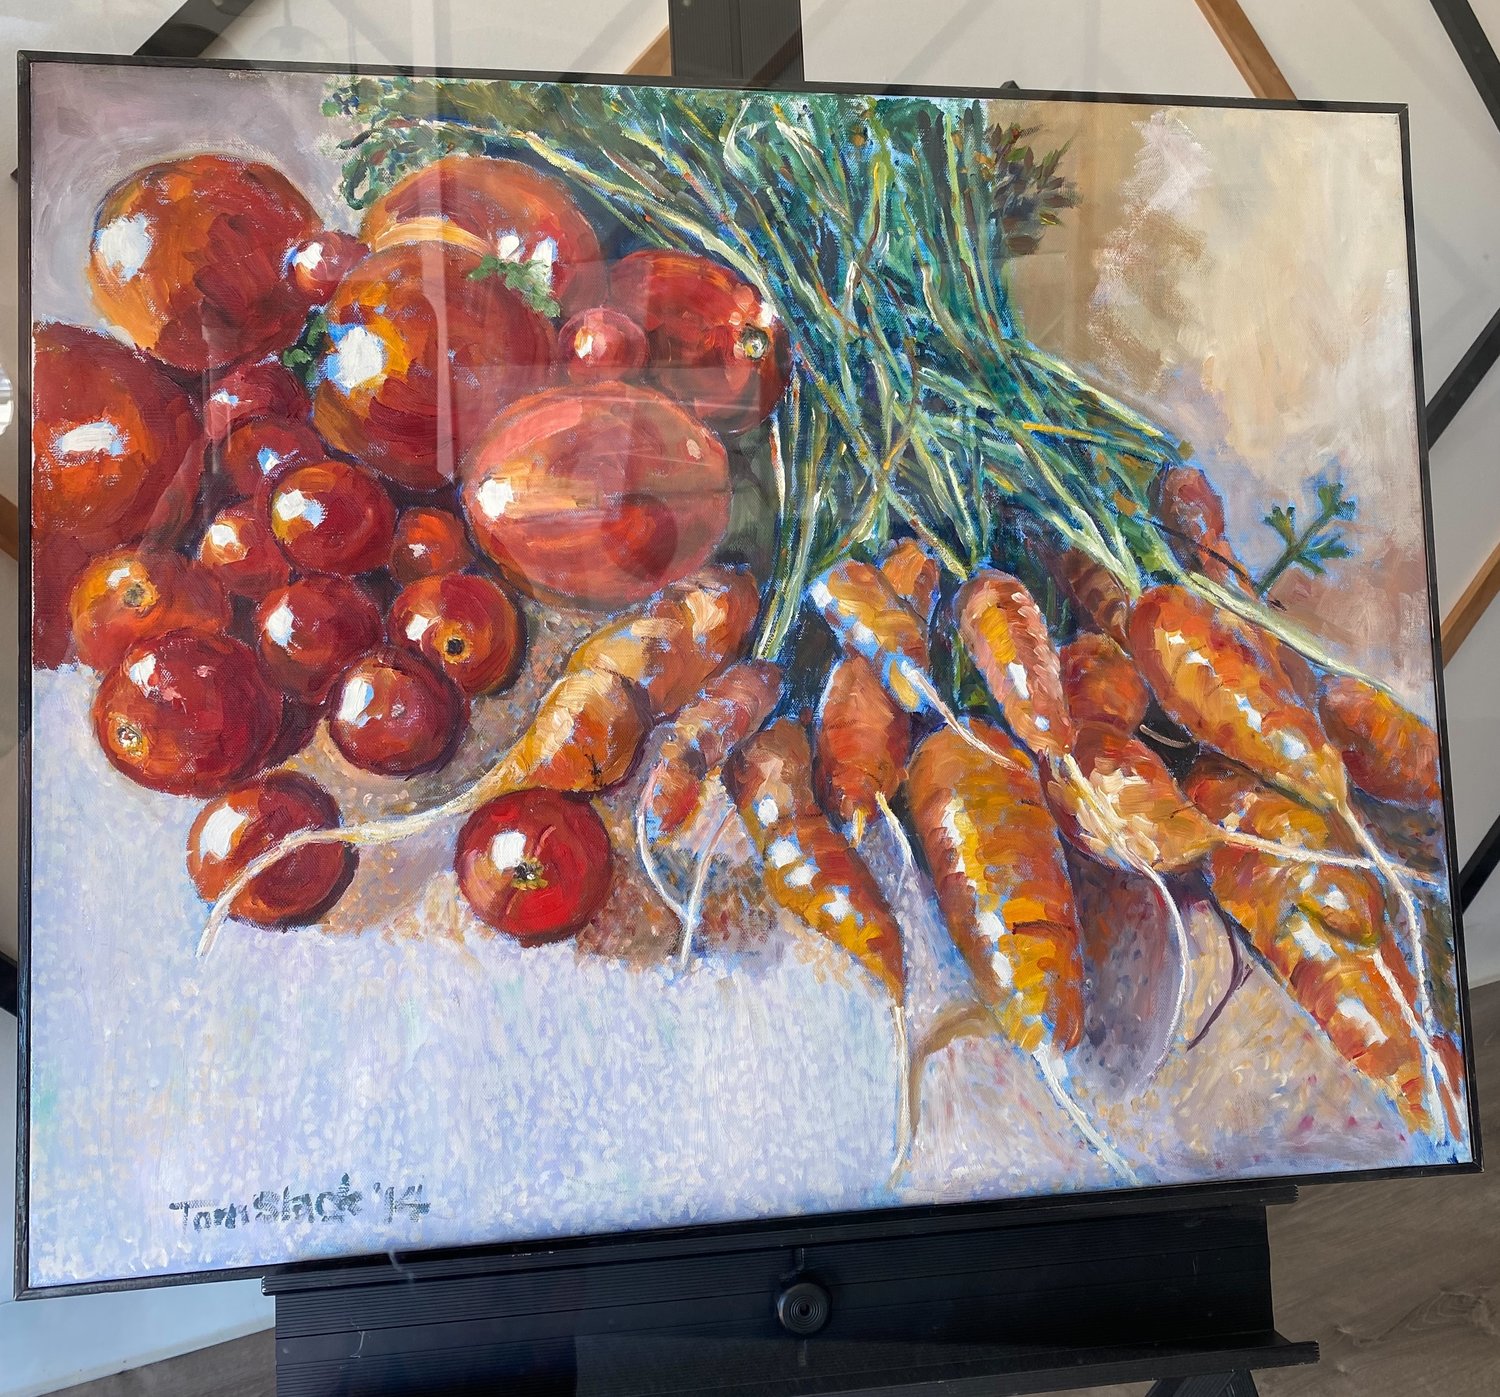 Artist Tom Slack’s painting of fresh tomatoes and carrots were a feast for the eyes.